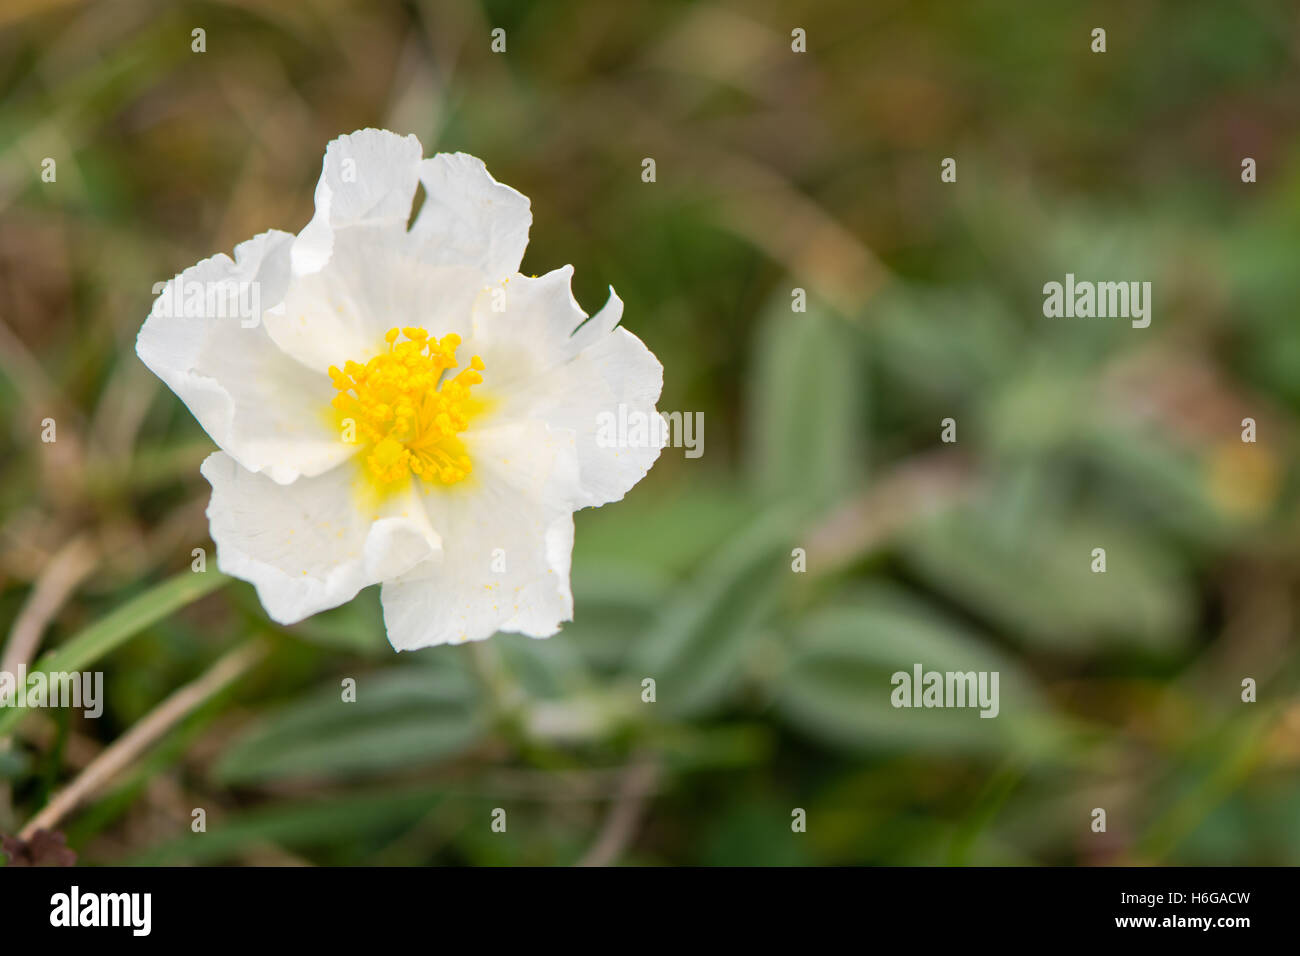 White rock rose (Helianthemum apenninum) flower. Rare delicate white flower of this low growing plant in the family Cistaceae Stock Photo